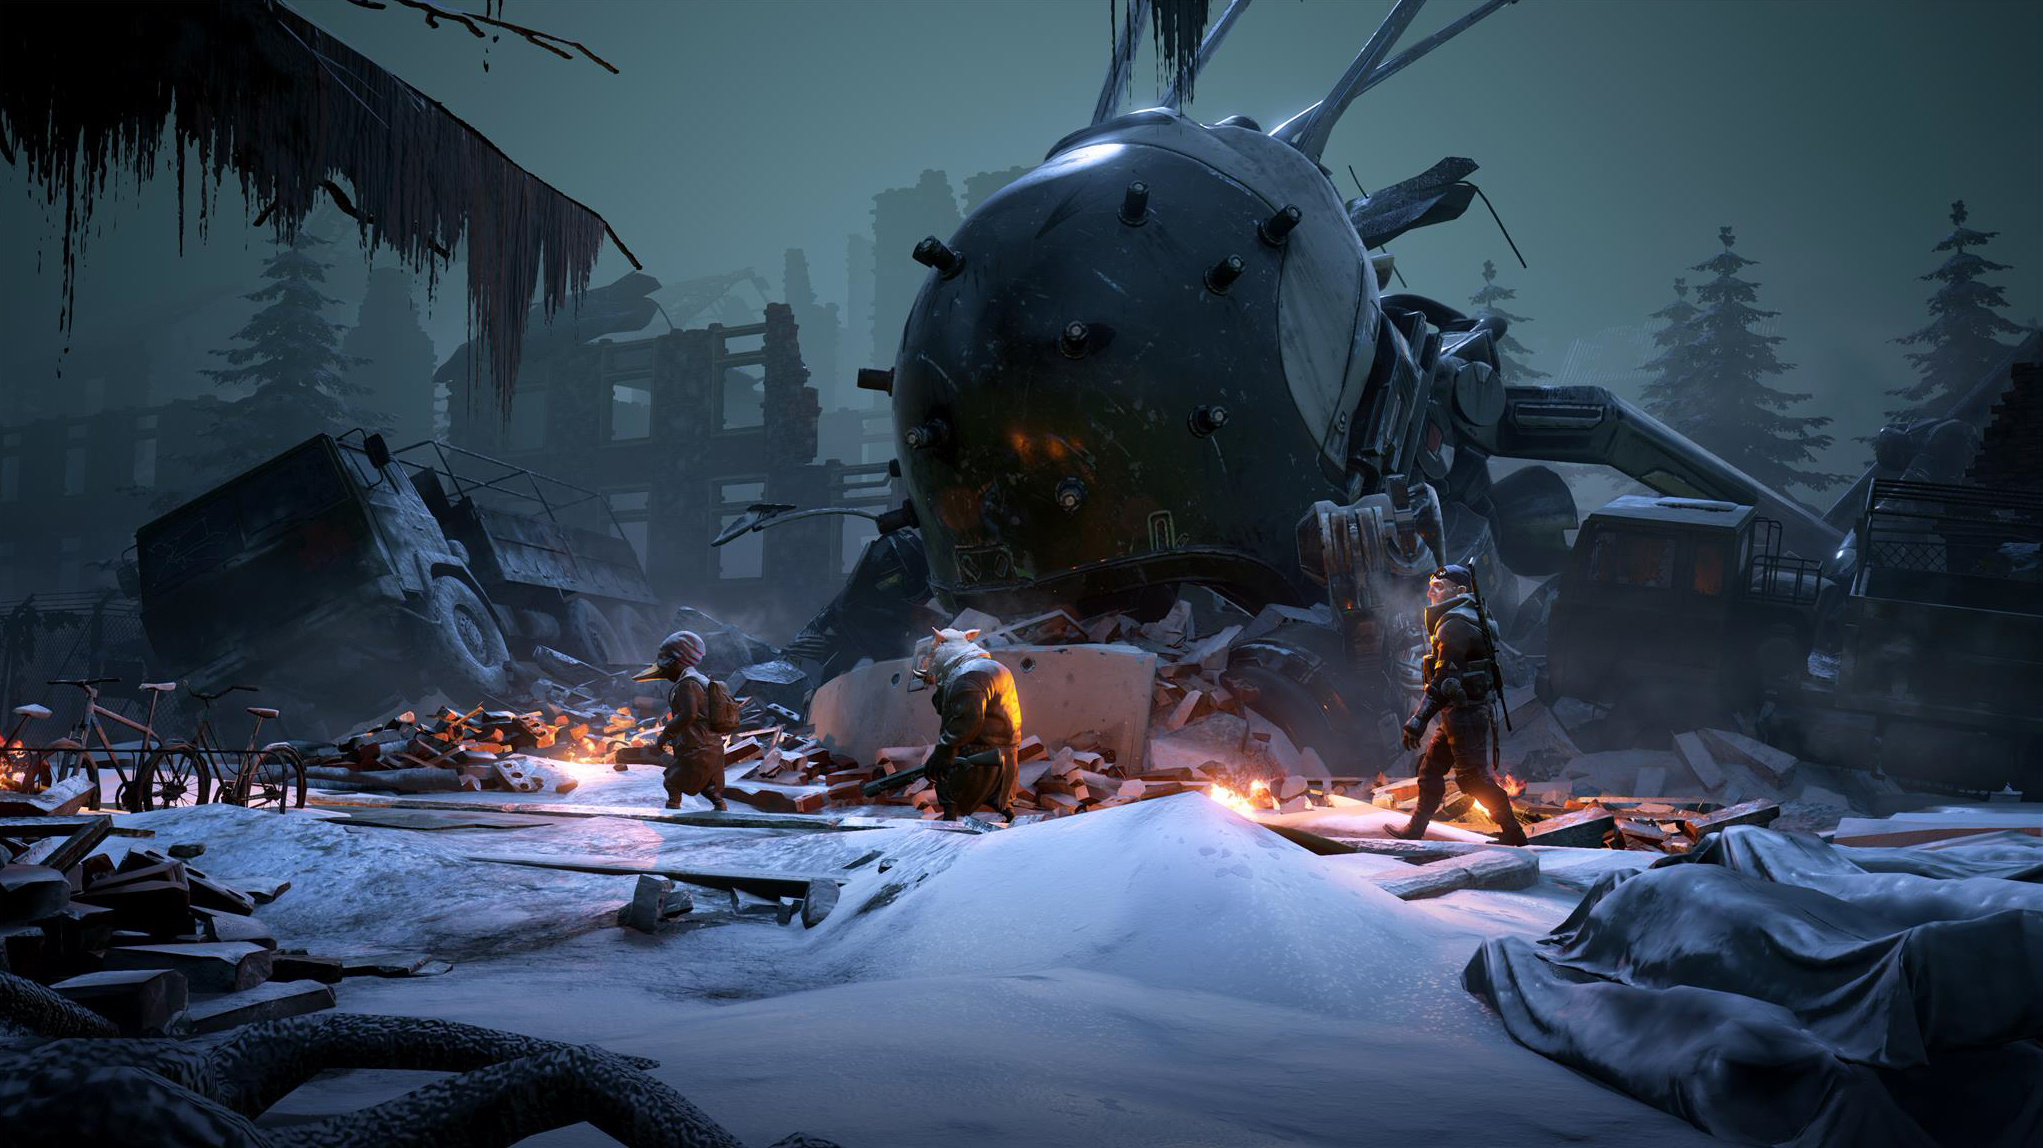 mutant-year-zero-road-to-eden-looks-like-a-tactical-ps4-rpg-to-keep-an-eye-on-push-square